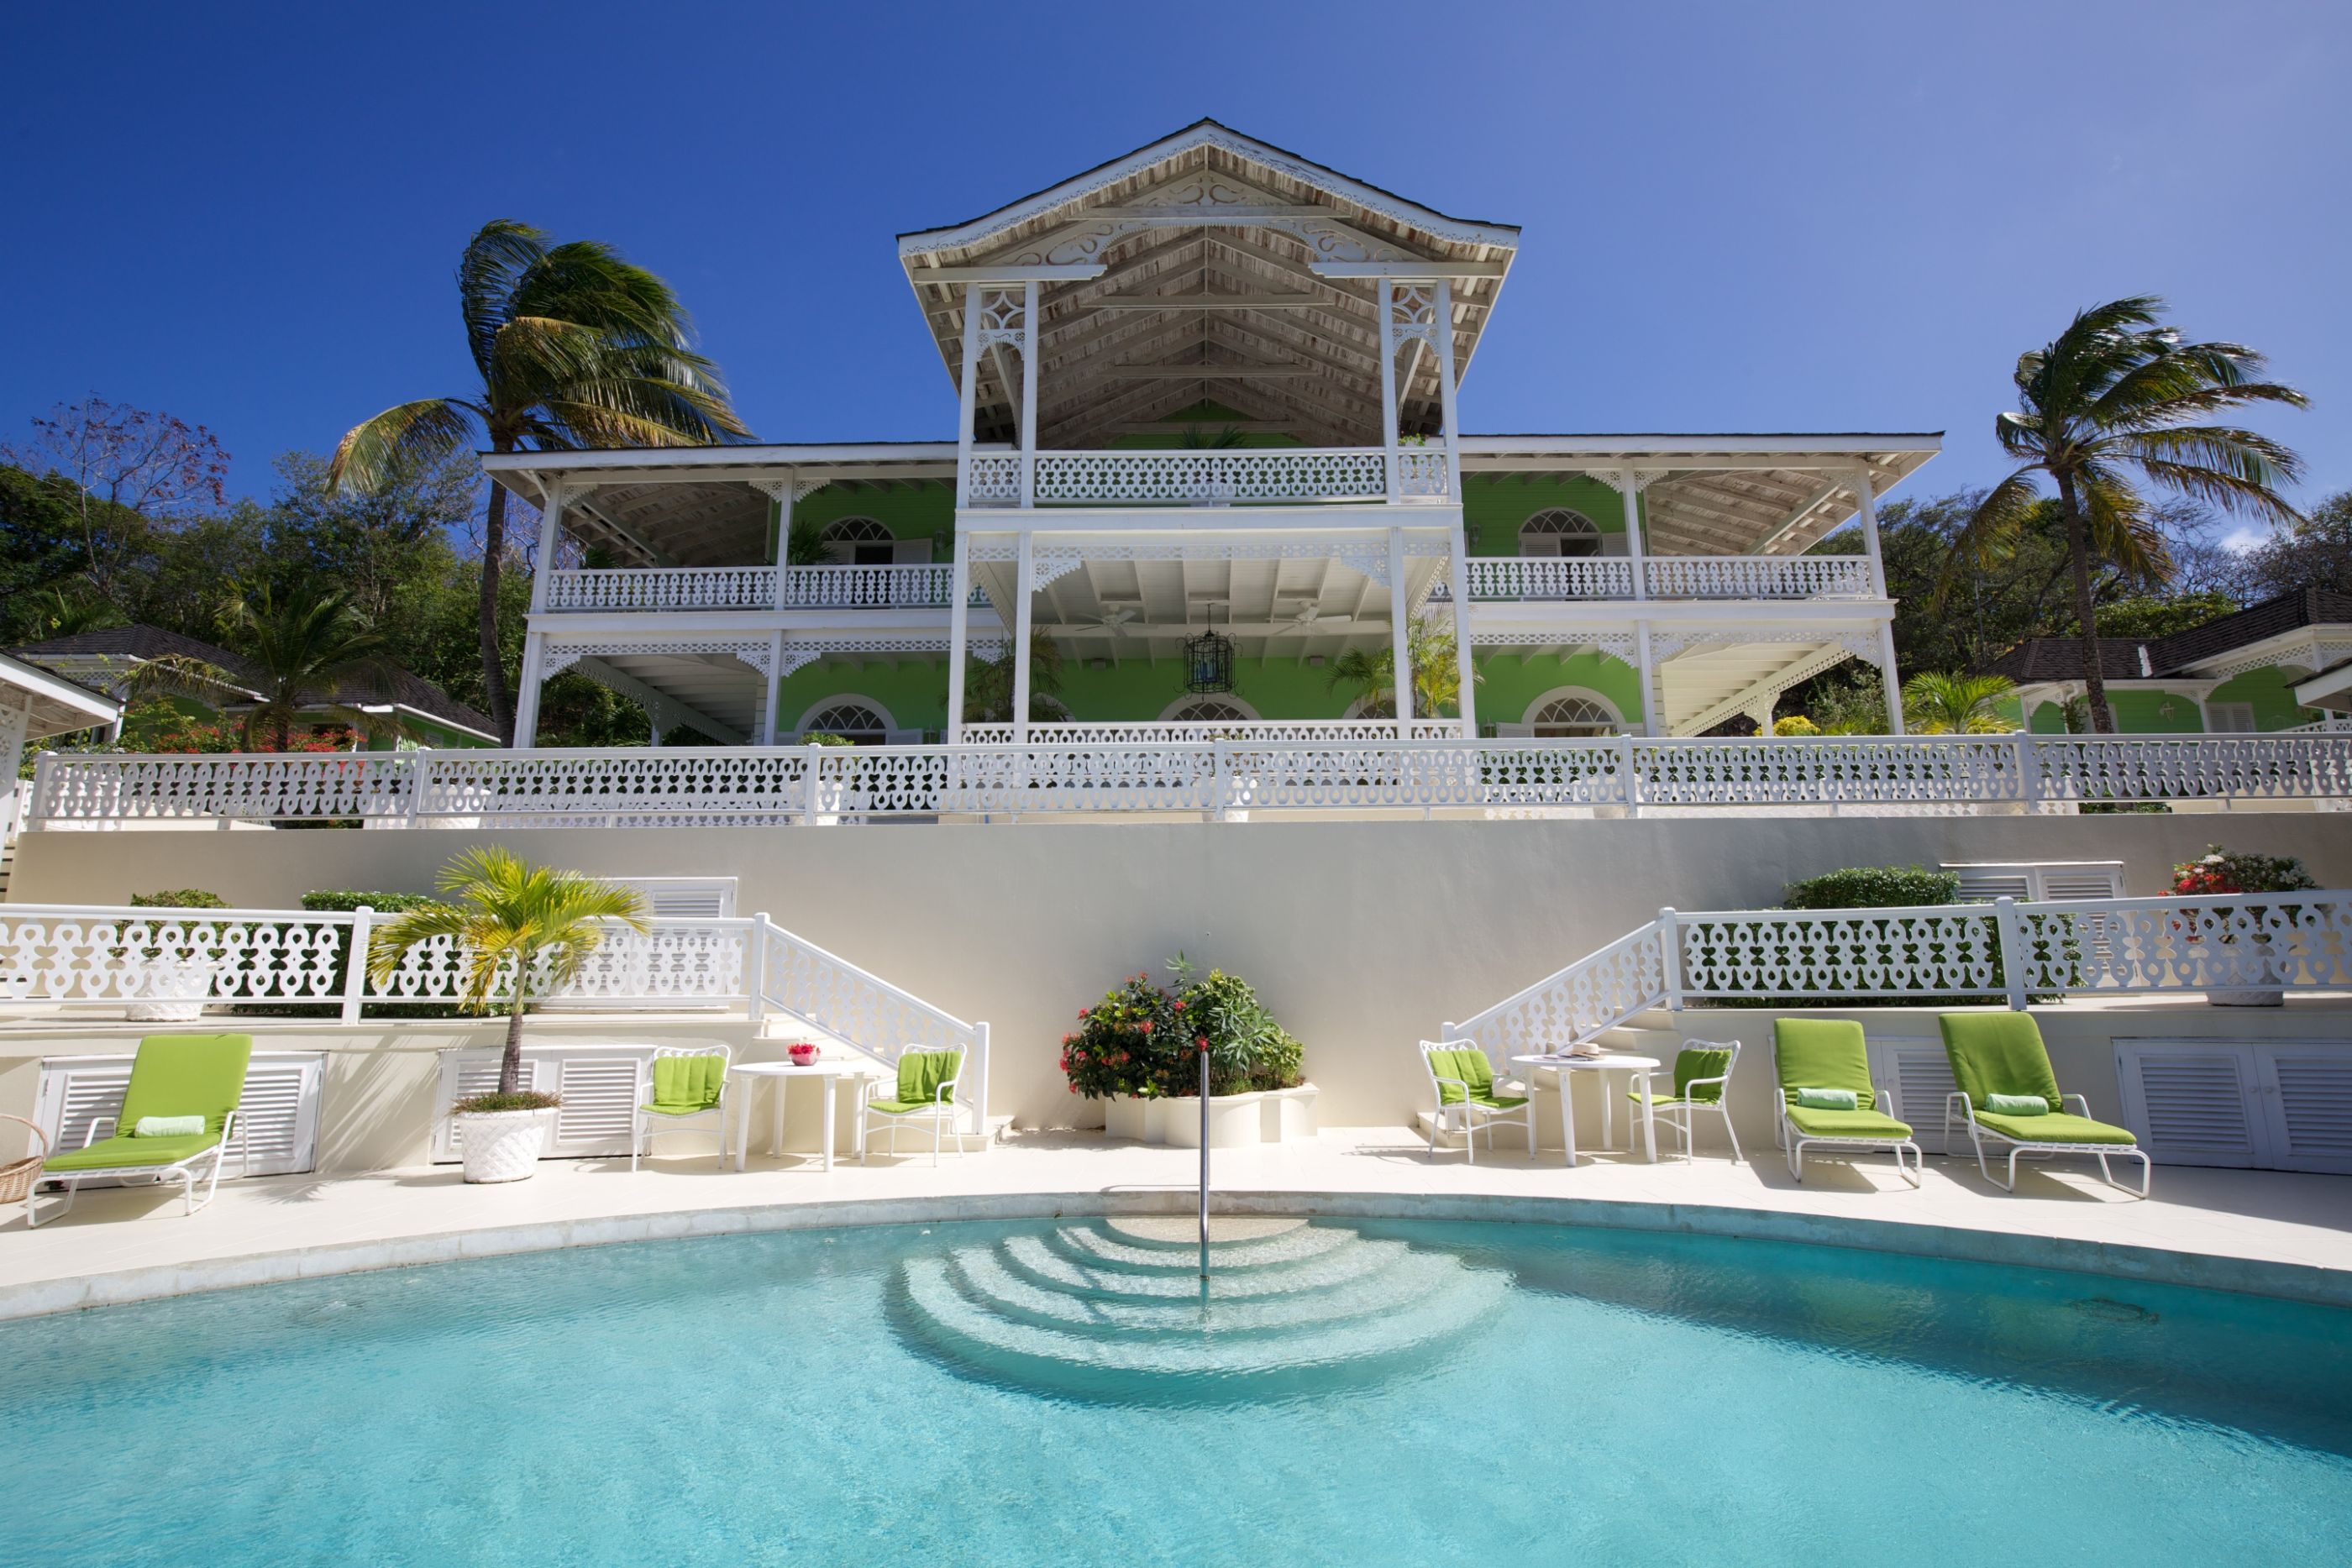 Swimming pool and facade of Zinnia, Mustique